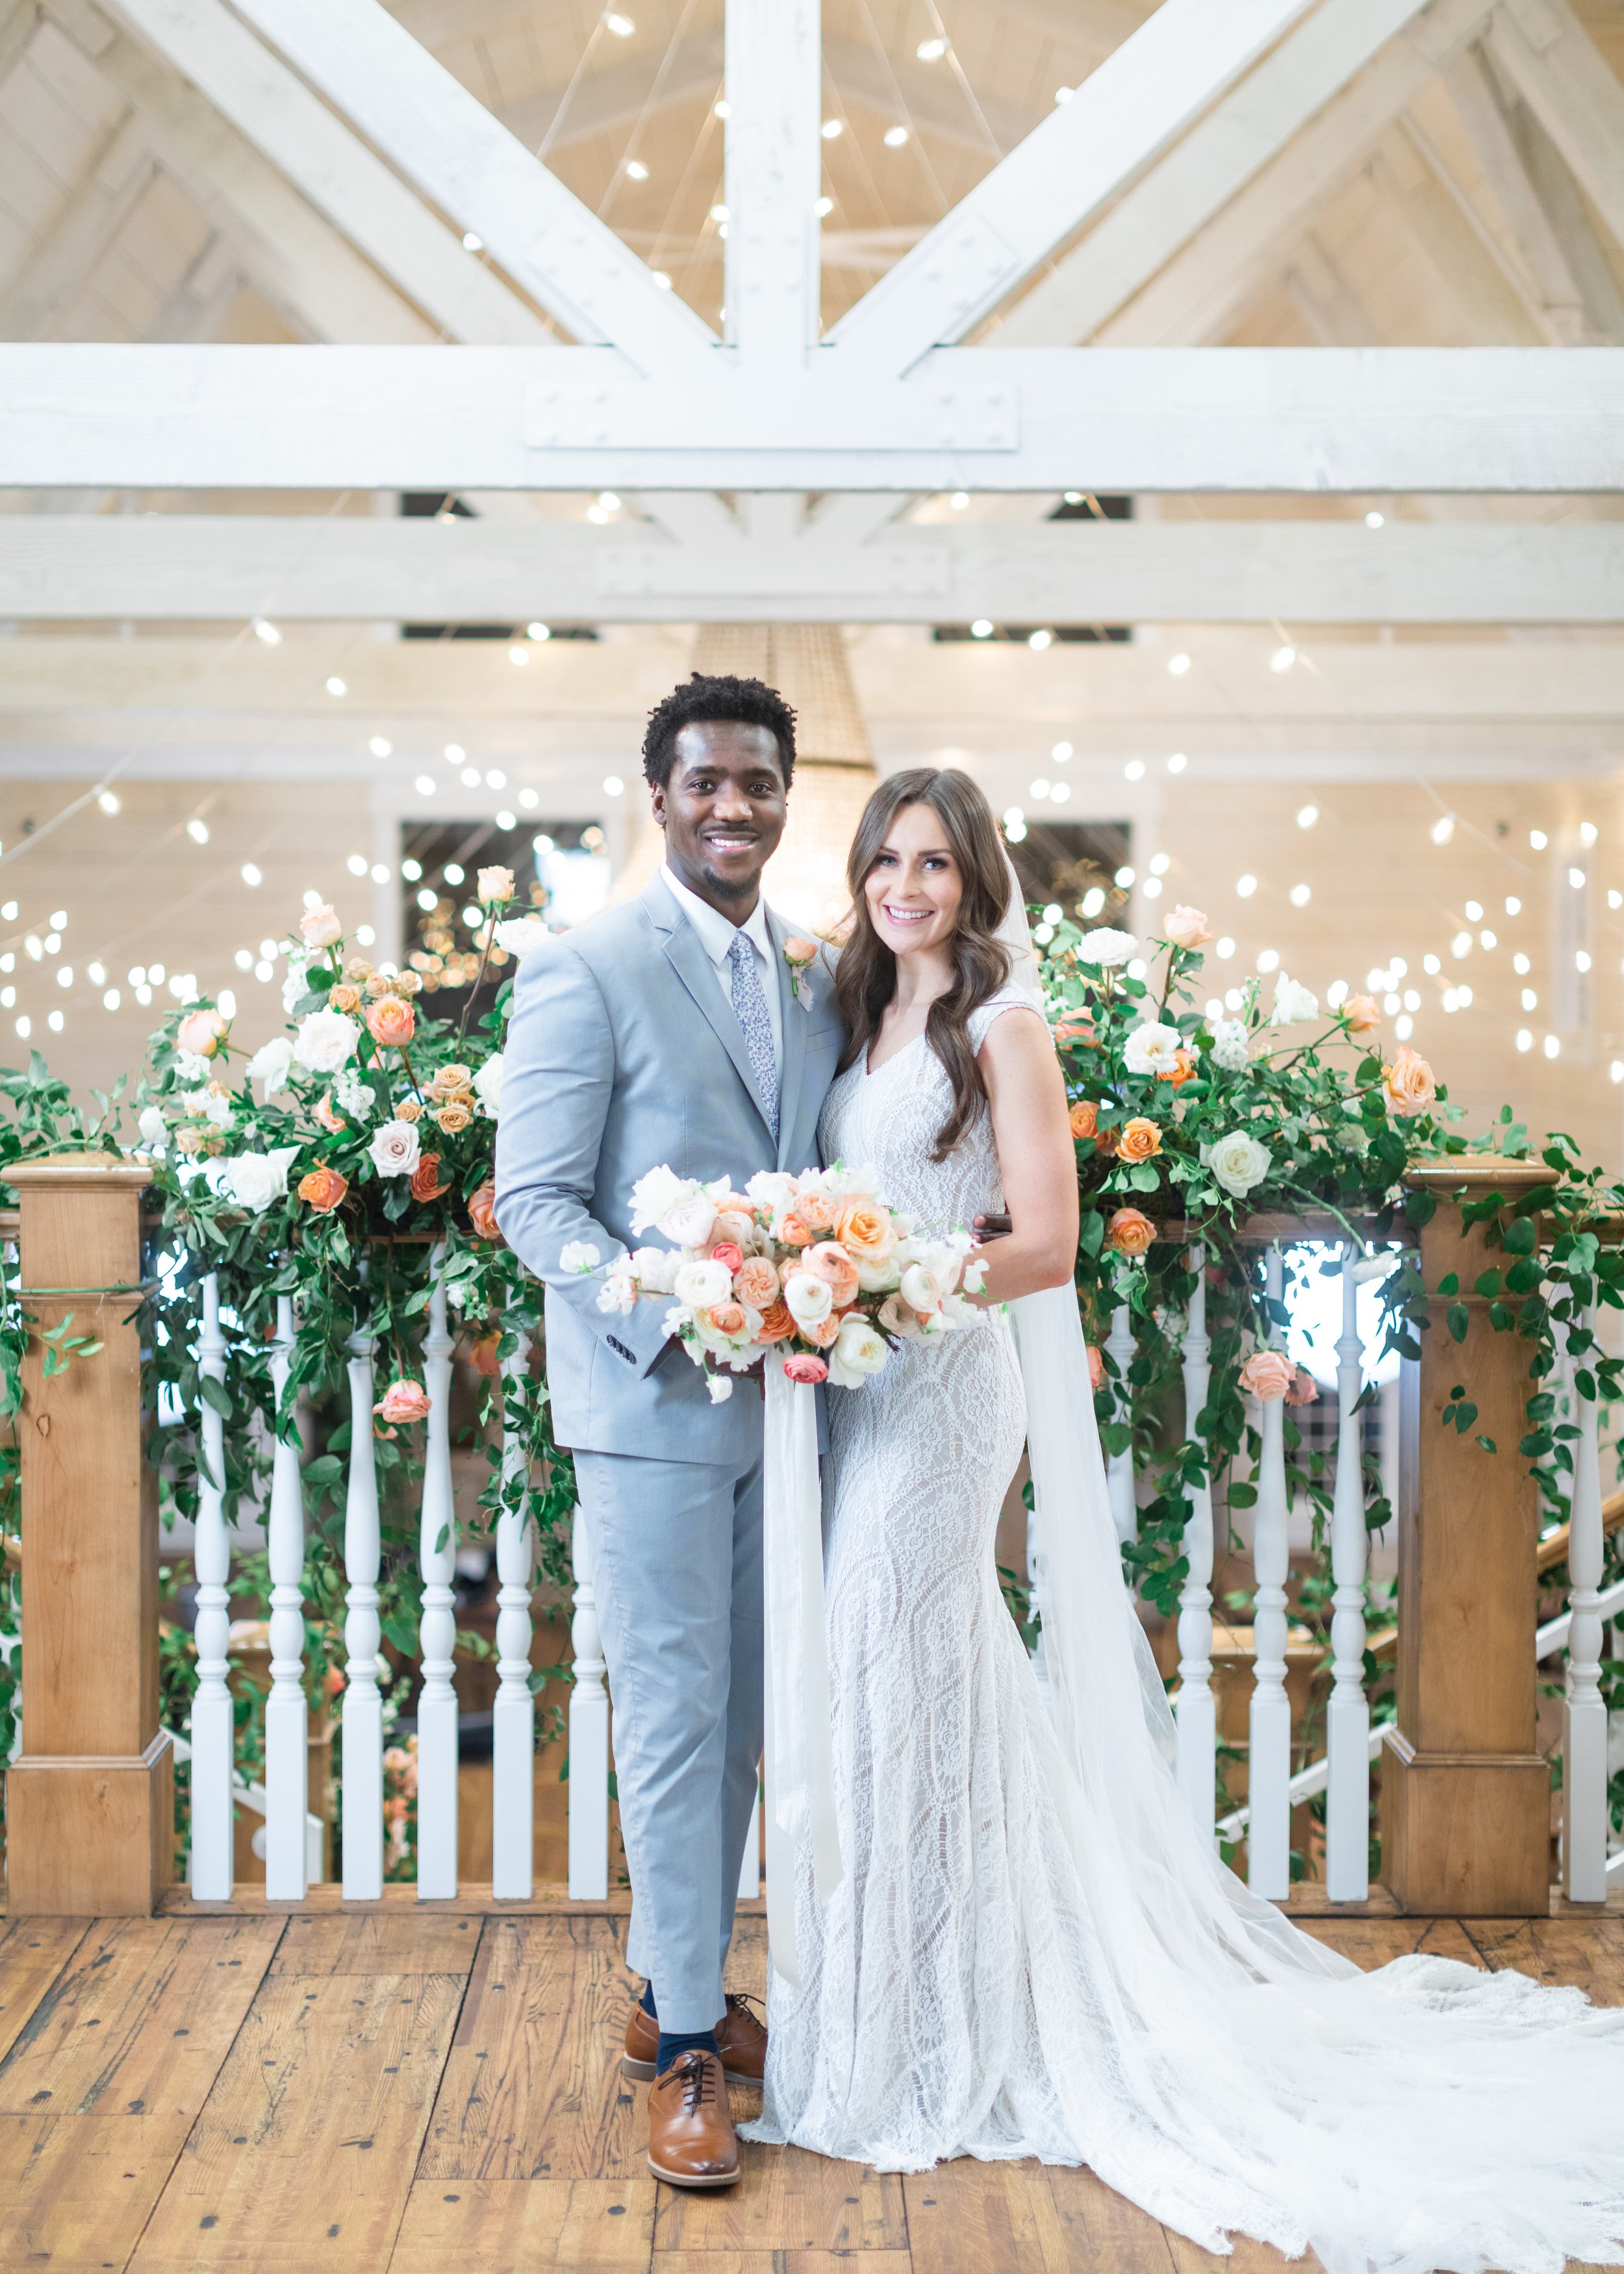  Bride with lace wedding gown and groom in gray suit holding the bridal bouquet together captured by Savanna Richardson Photography. peach bouquet #savannarichardsonphotography #utahvendor #utahweddingphotographer #MilleFleurDesign #Utahweddingdesign